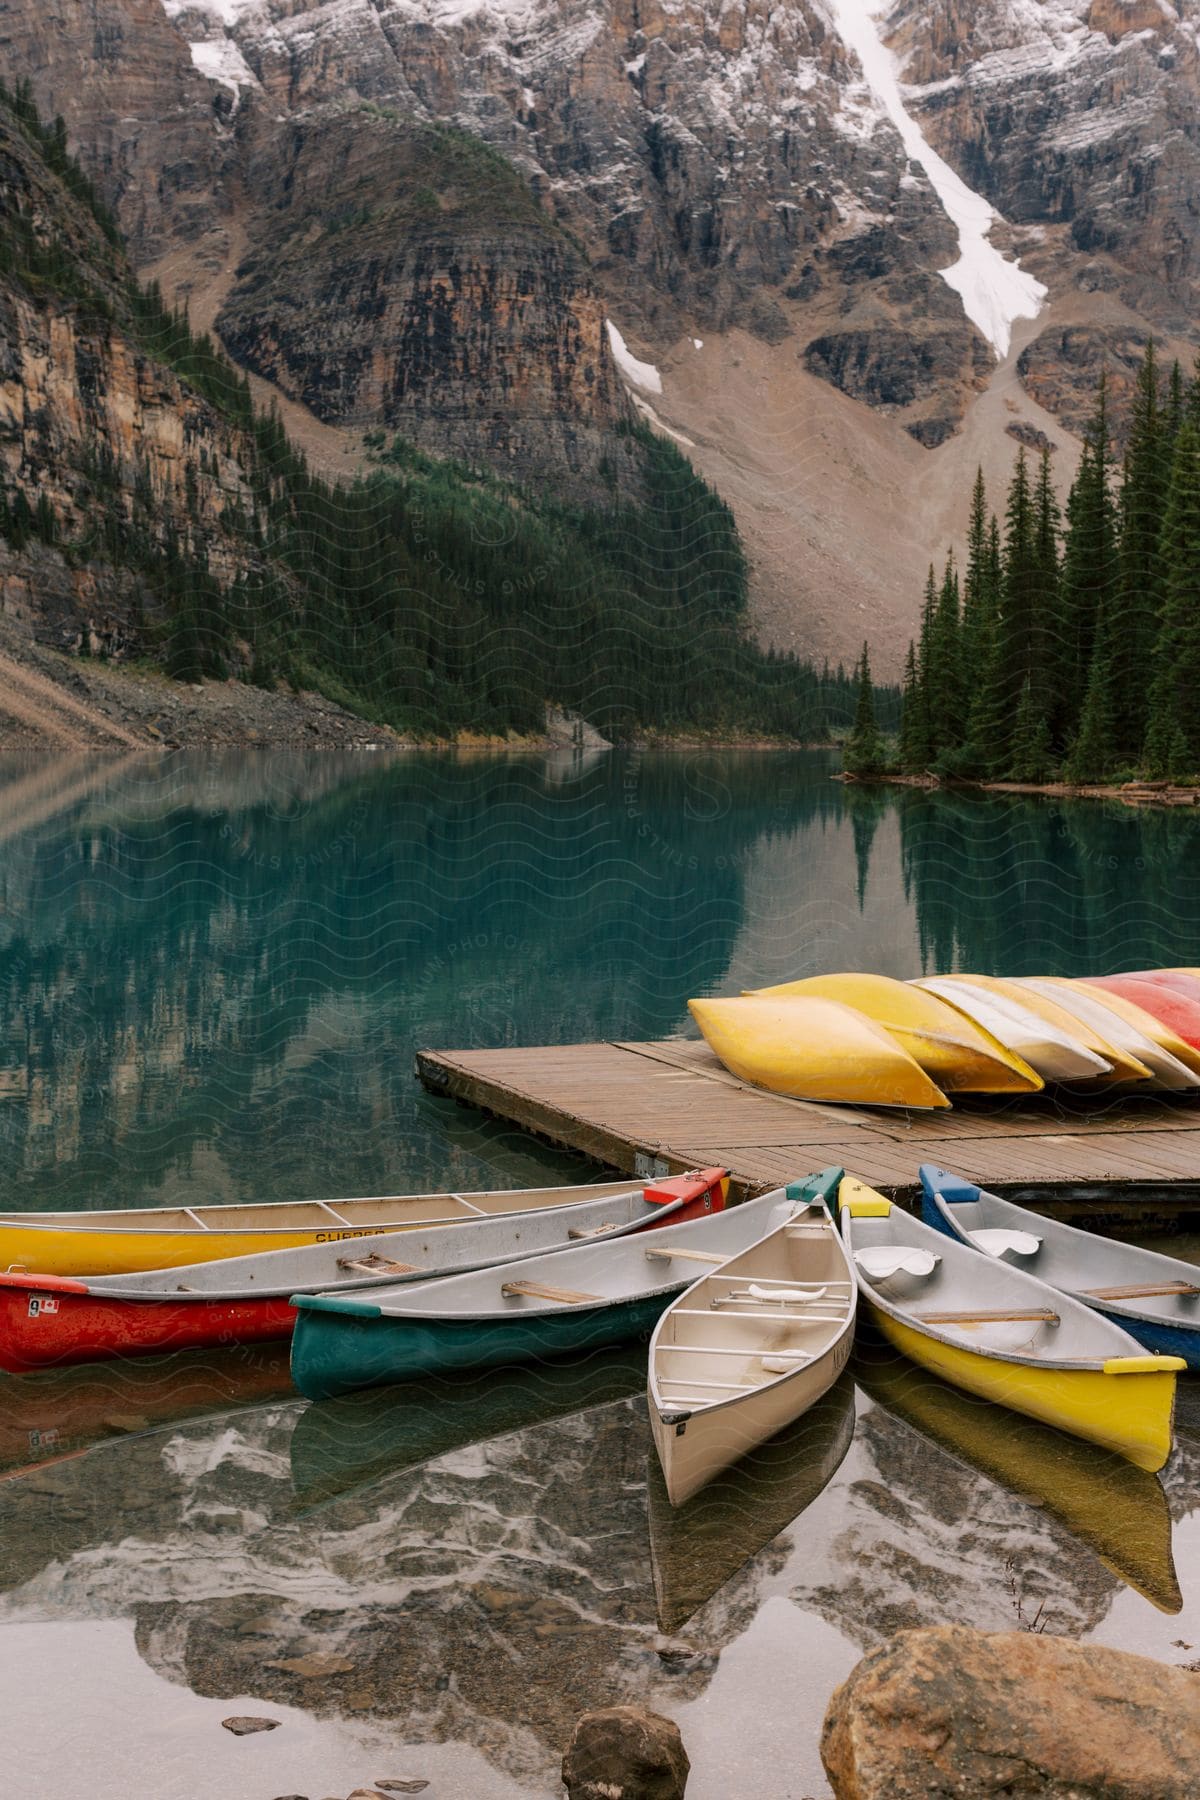 Canoes on the dock and in the water with forested mountains in the distance